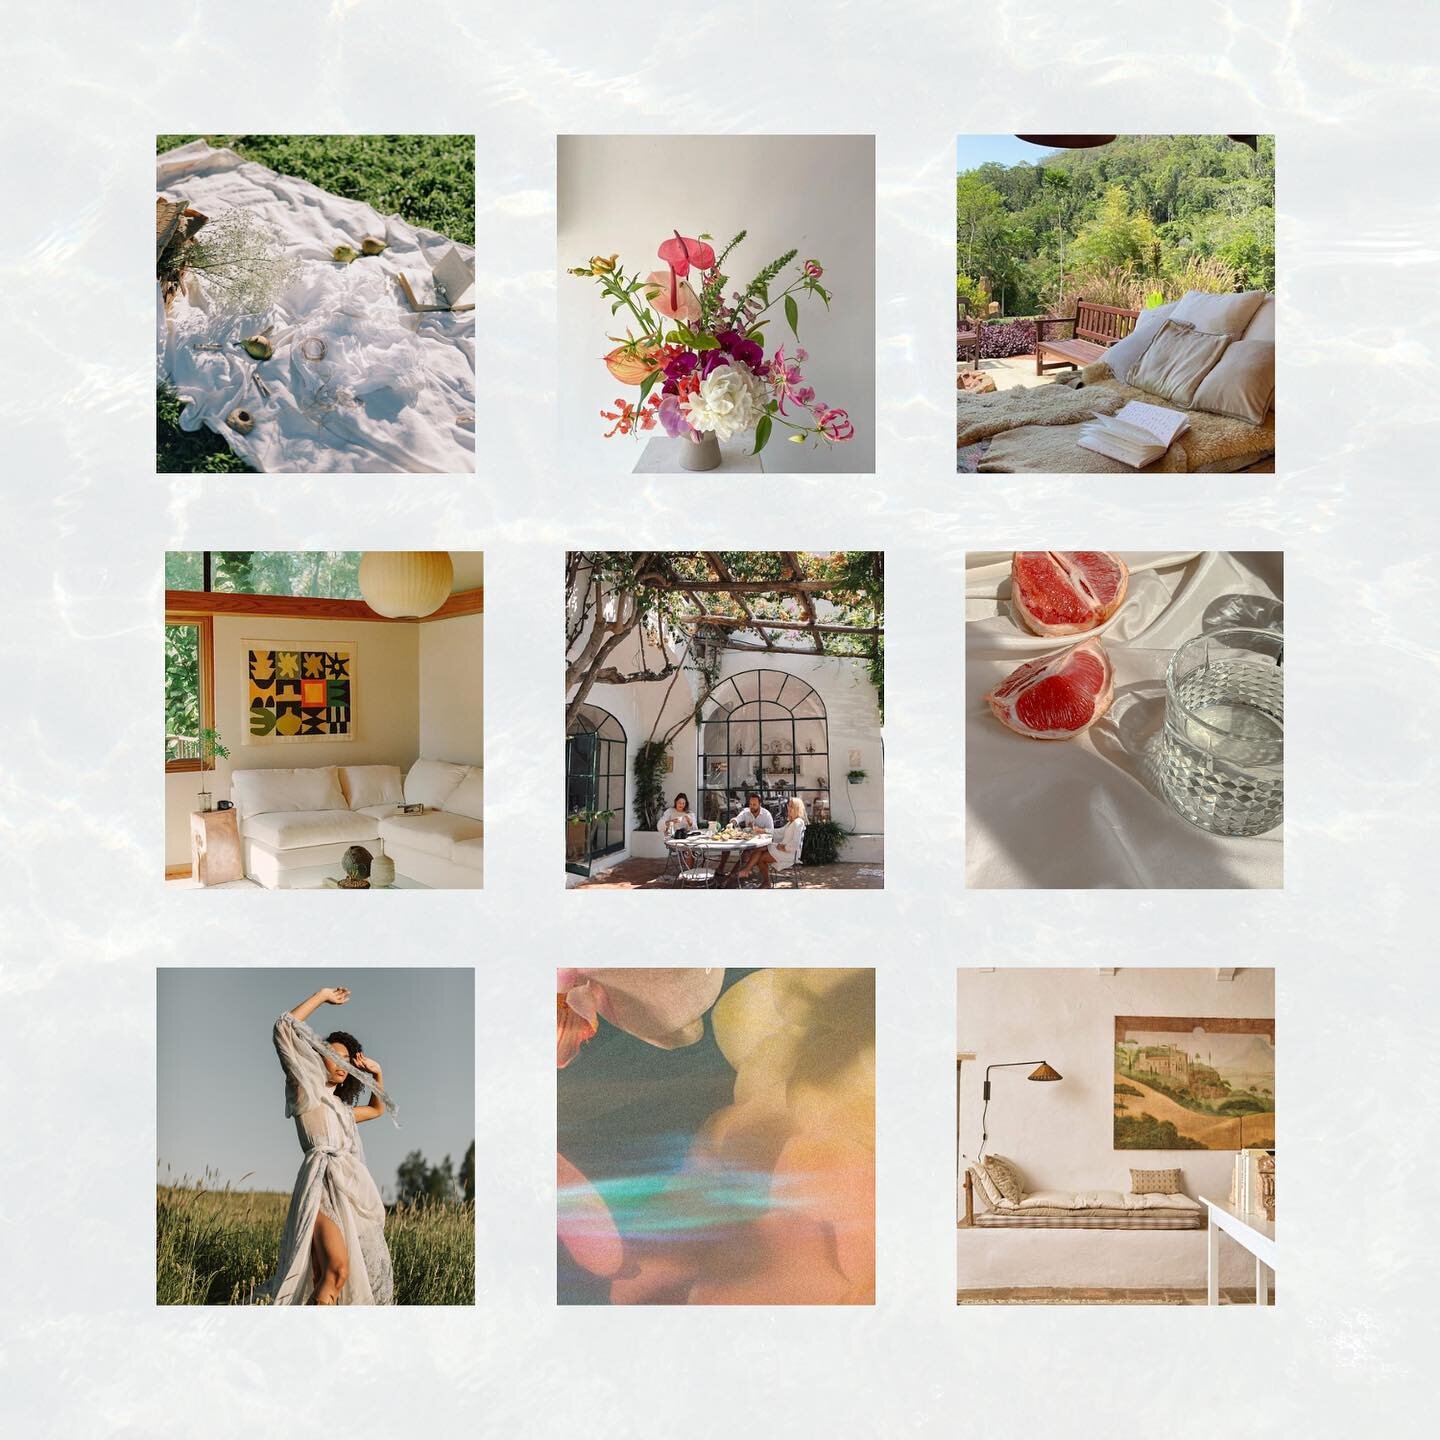 A little 👀 sneaky peaky 👀 moodboard of a fun new branding/website project in the works! Love the creative discovery process with our clients and nailing down that perfect direction.

#moodboard #pastelaesthetic #summerineurope #branddiscovery #bran